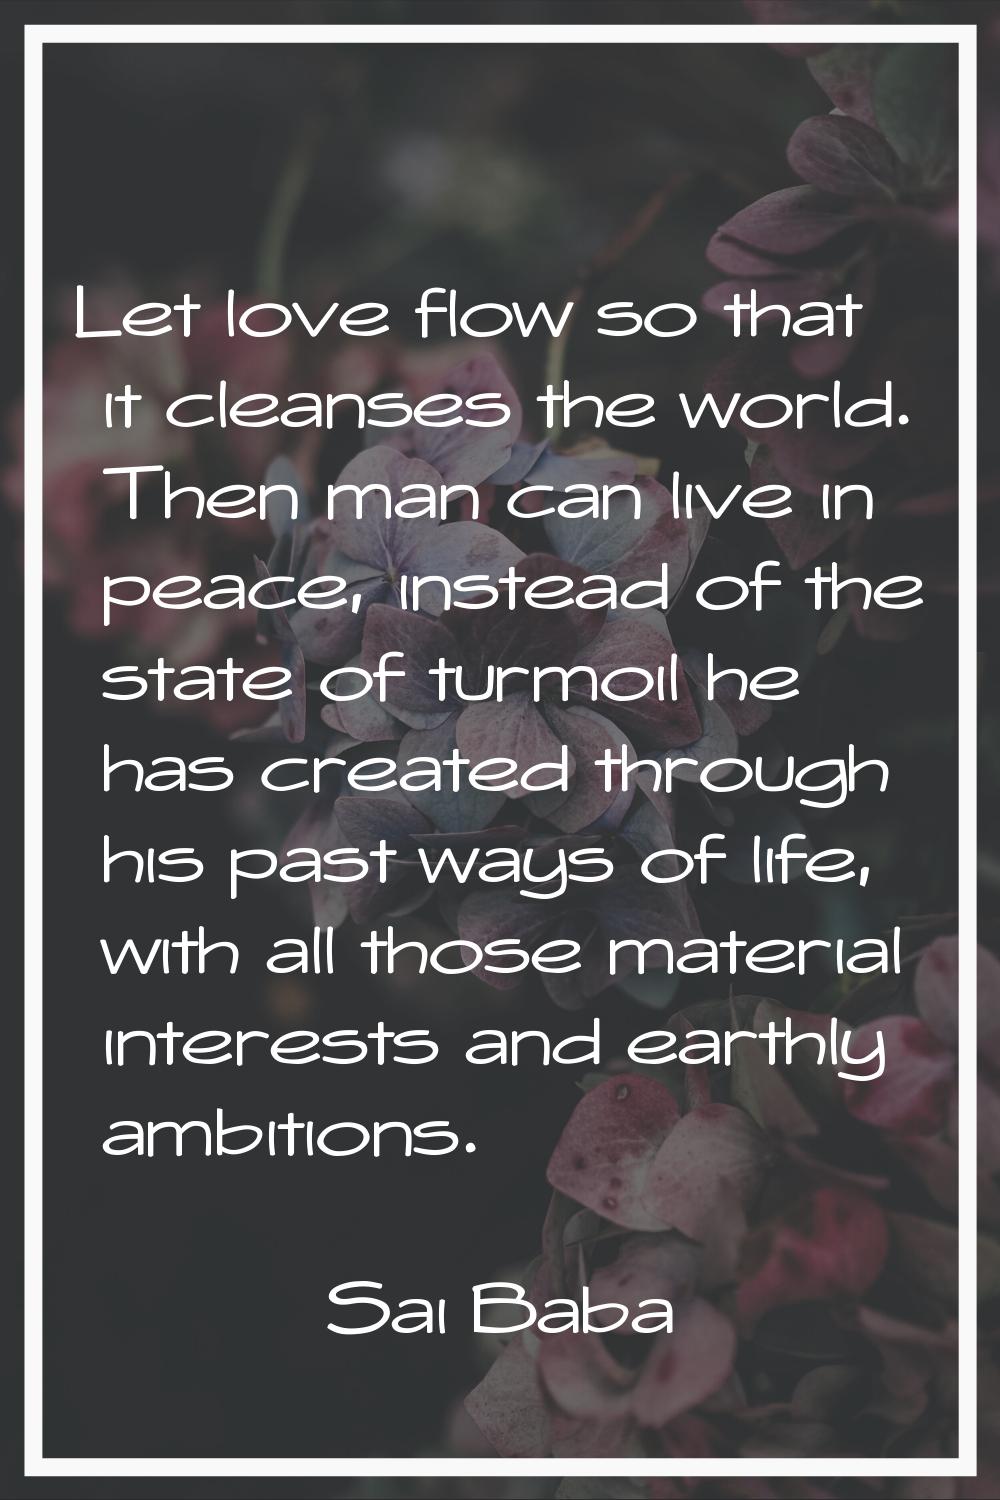 Let love flow so that it cleanses the world. Then man can live in peace, instead of the state of tu